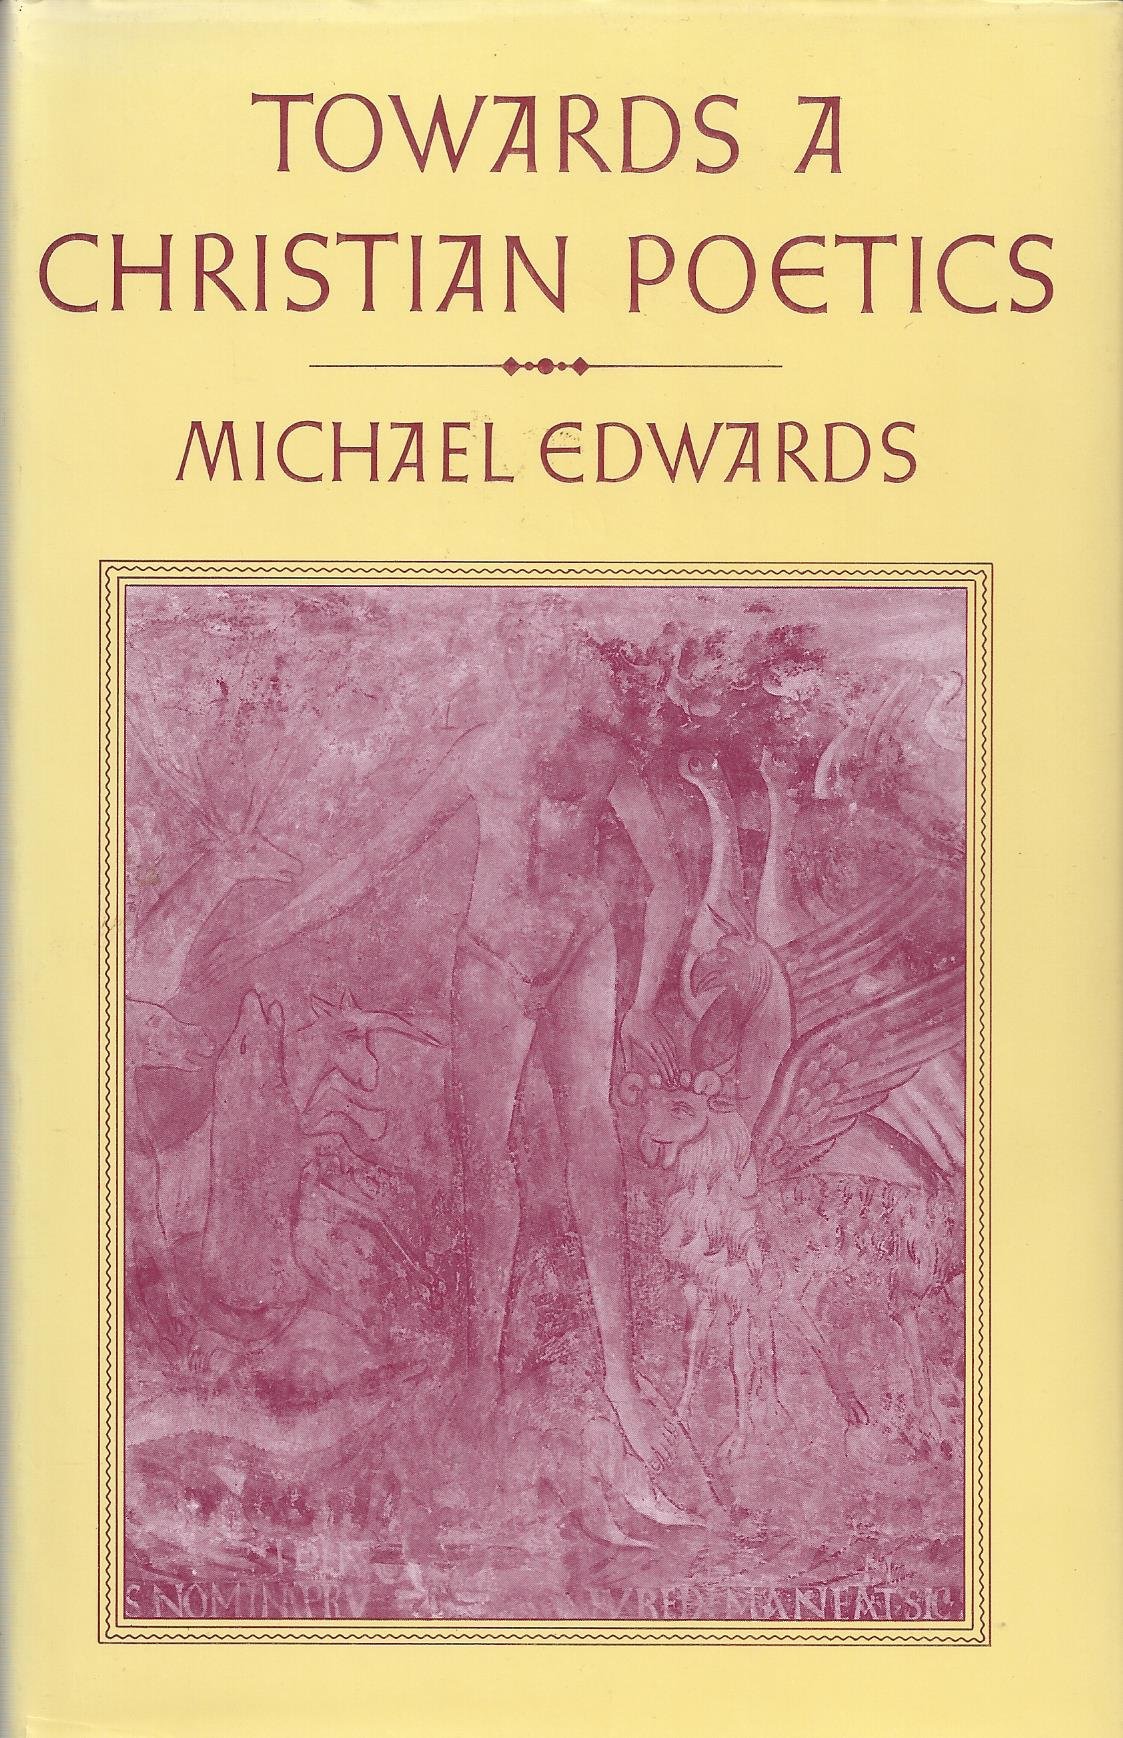 Cover of Towards a Christian Poetics